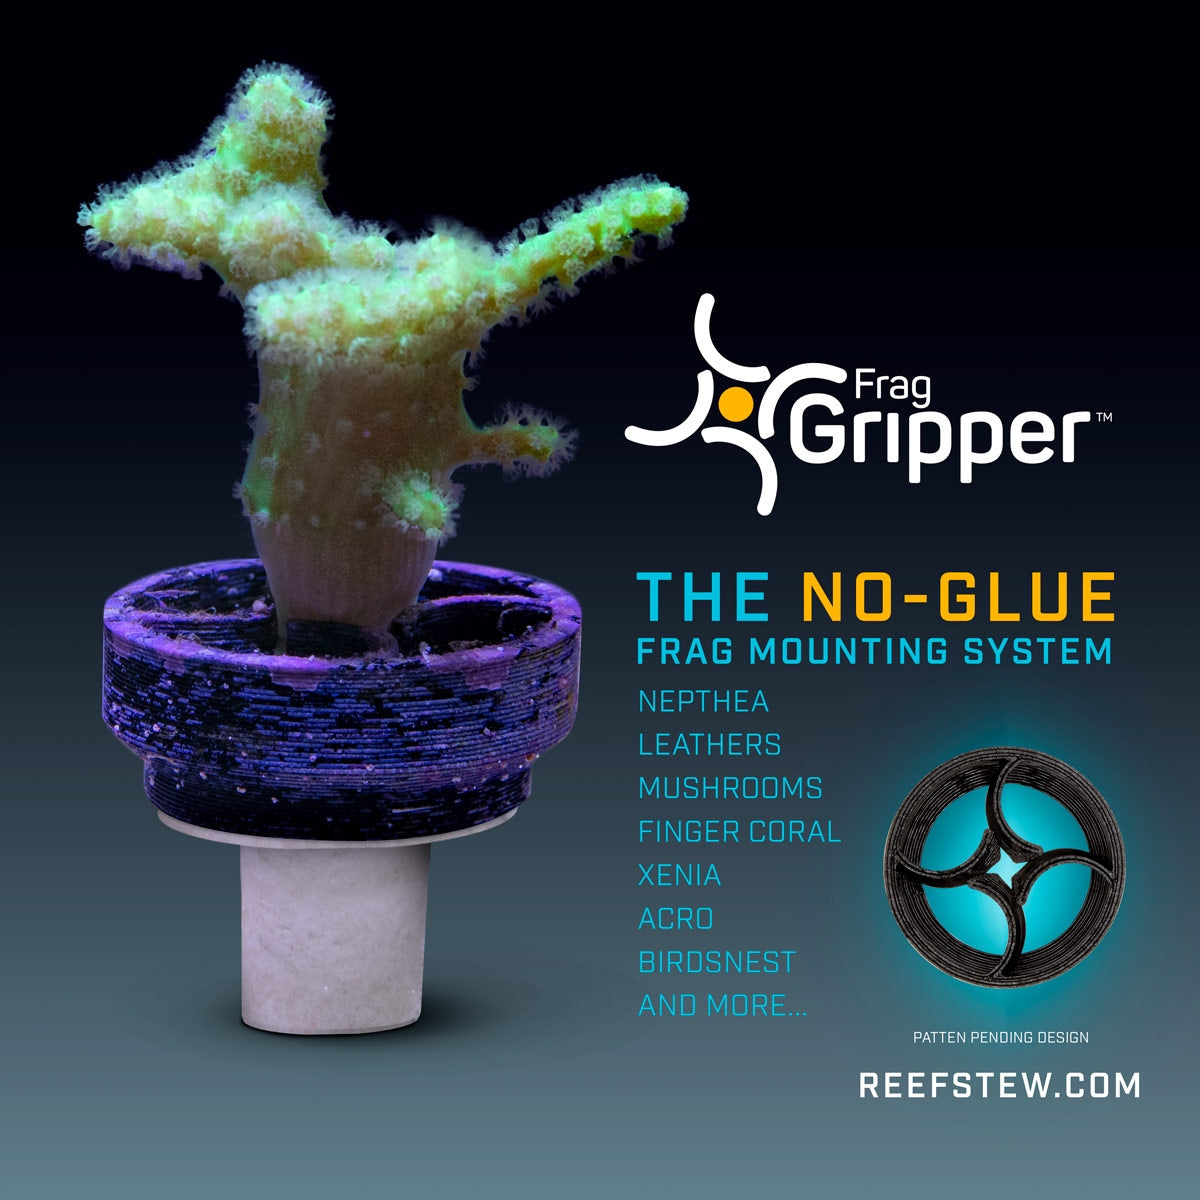 Frag Gripper by Reef Stew - The No Glue Frag Mounting System